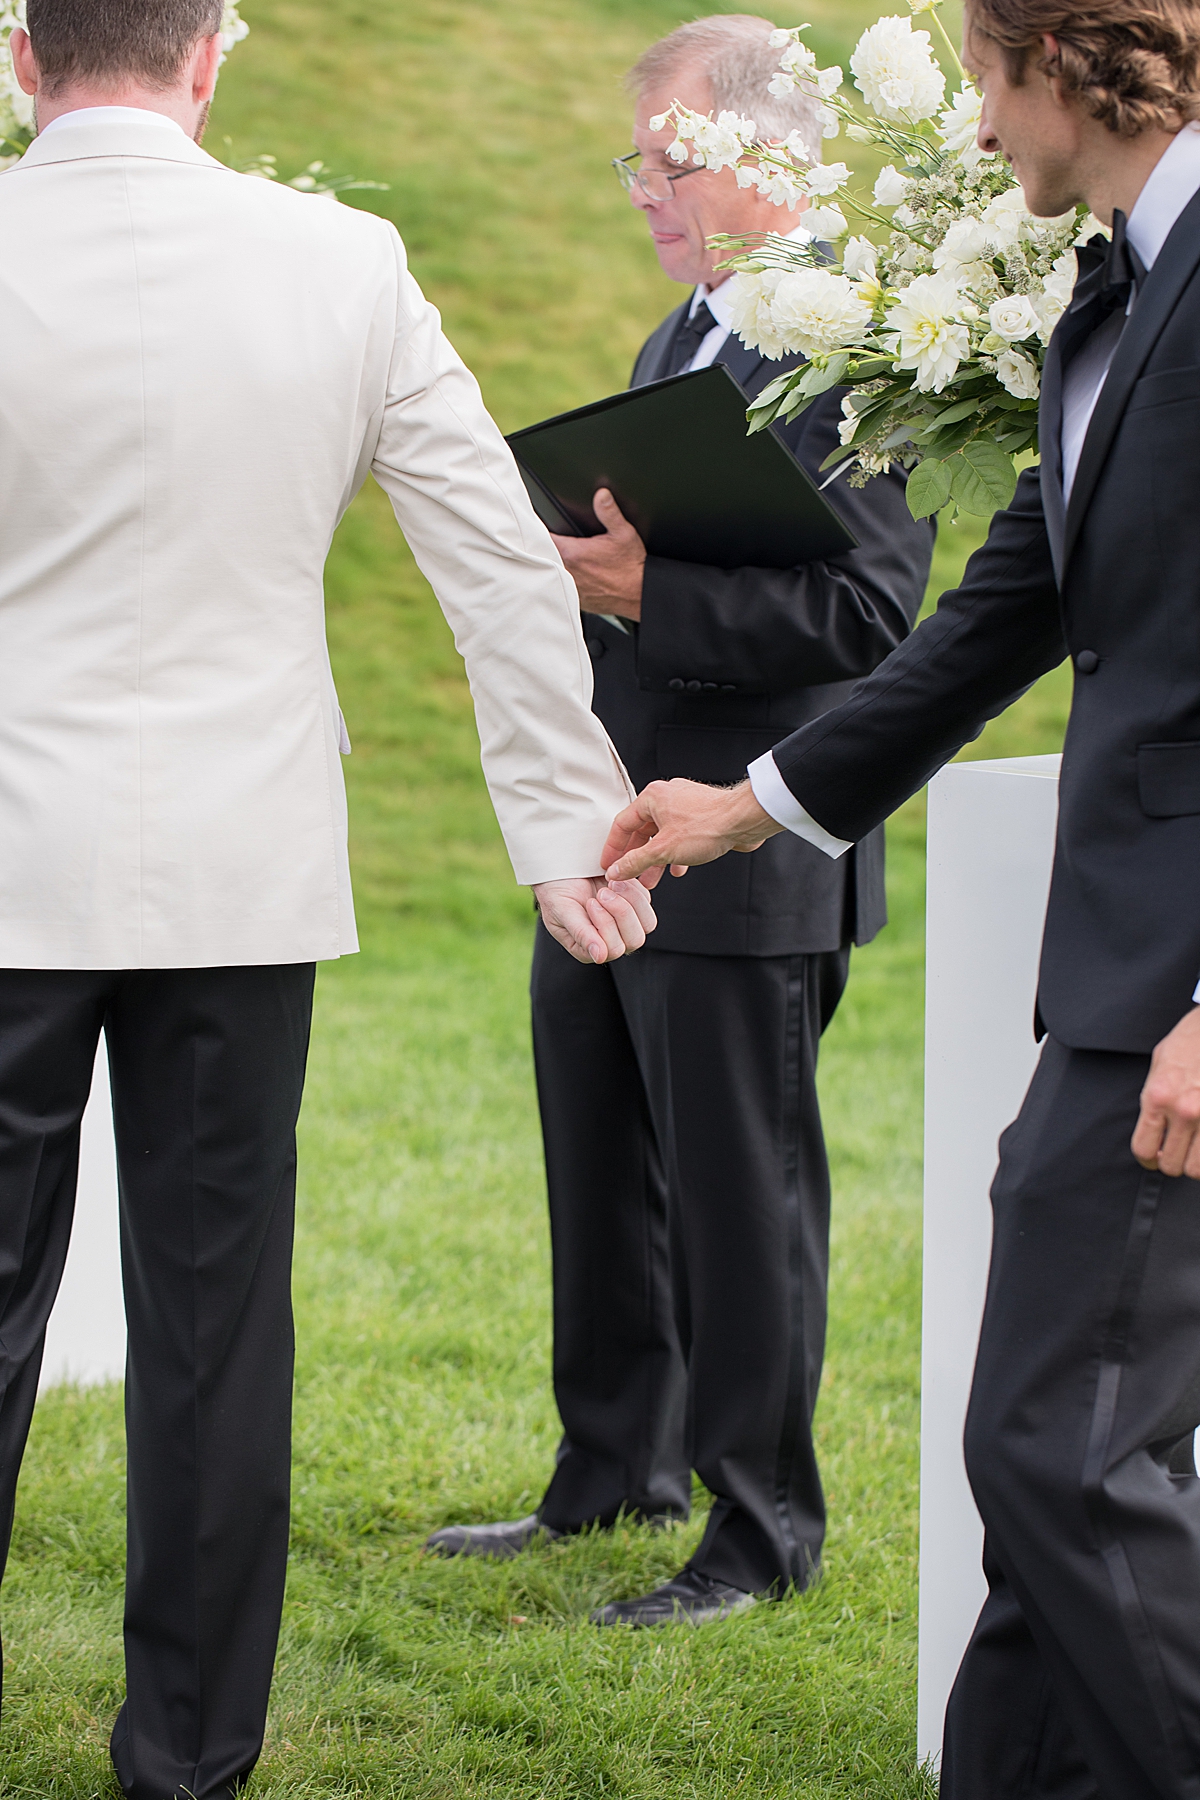 Exchanging of the rings at Ceremony at Aspen Meadows Resort Aspen Colorado Photographer